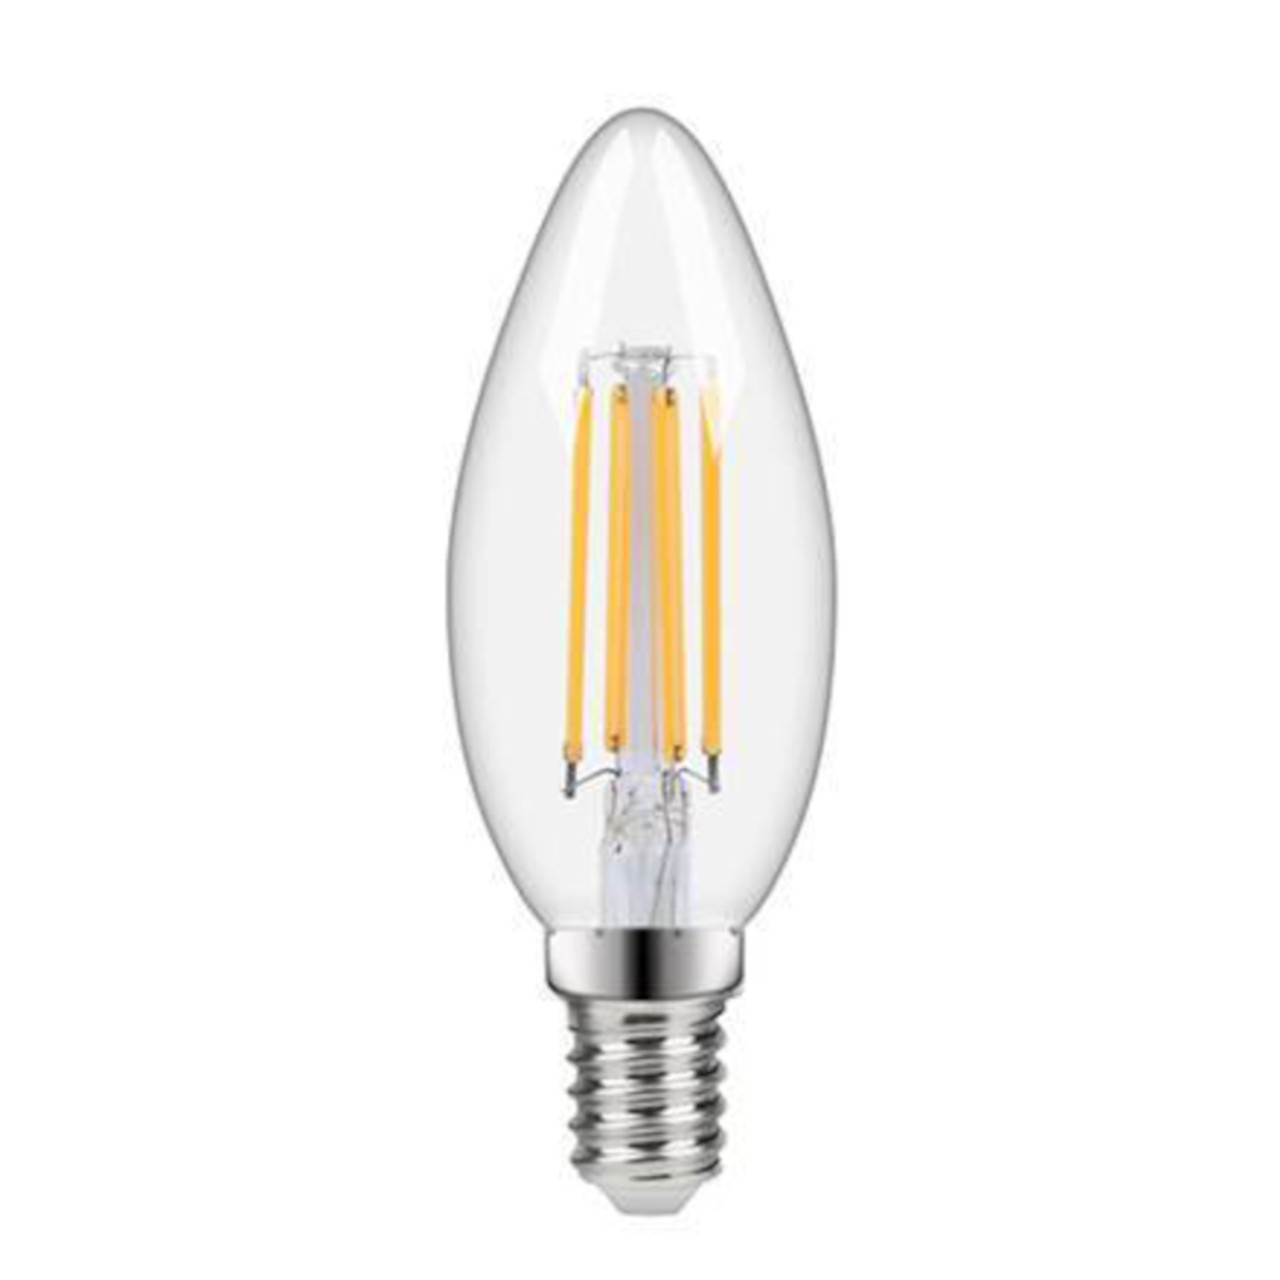 LED Filament Candle 4.2W (40W) SES 2700K 220-240V Clear Dimmable